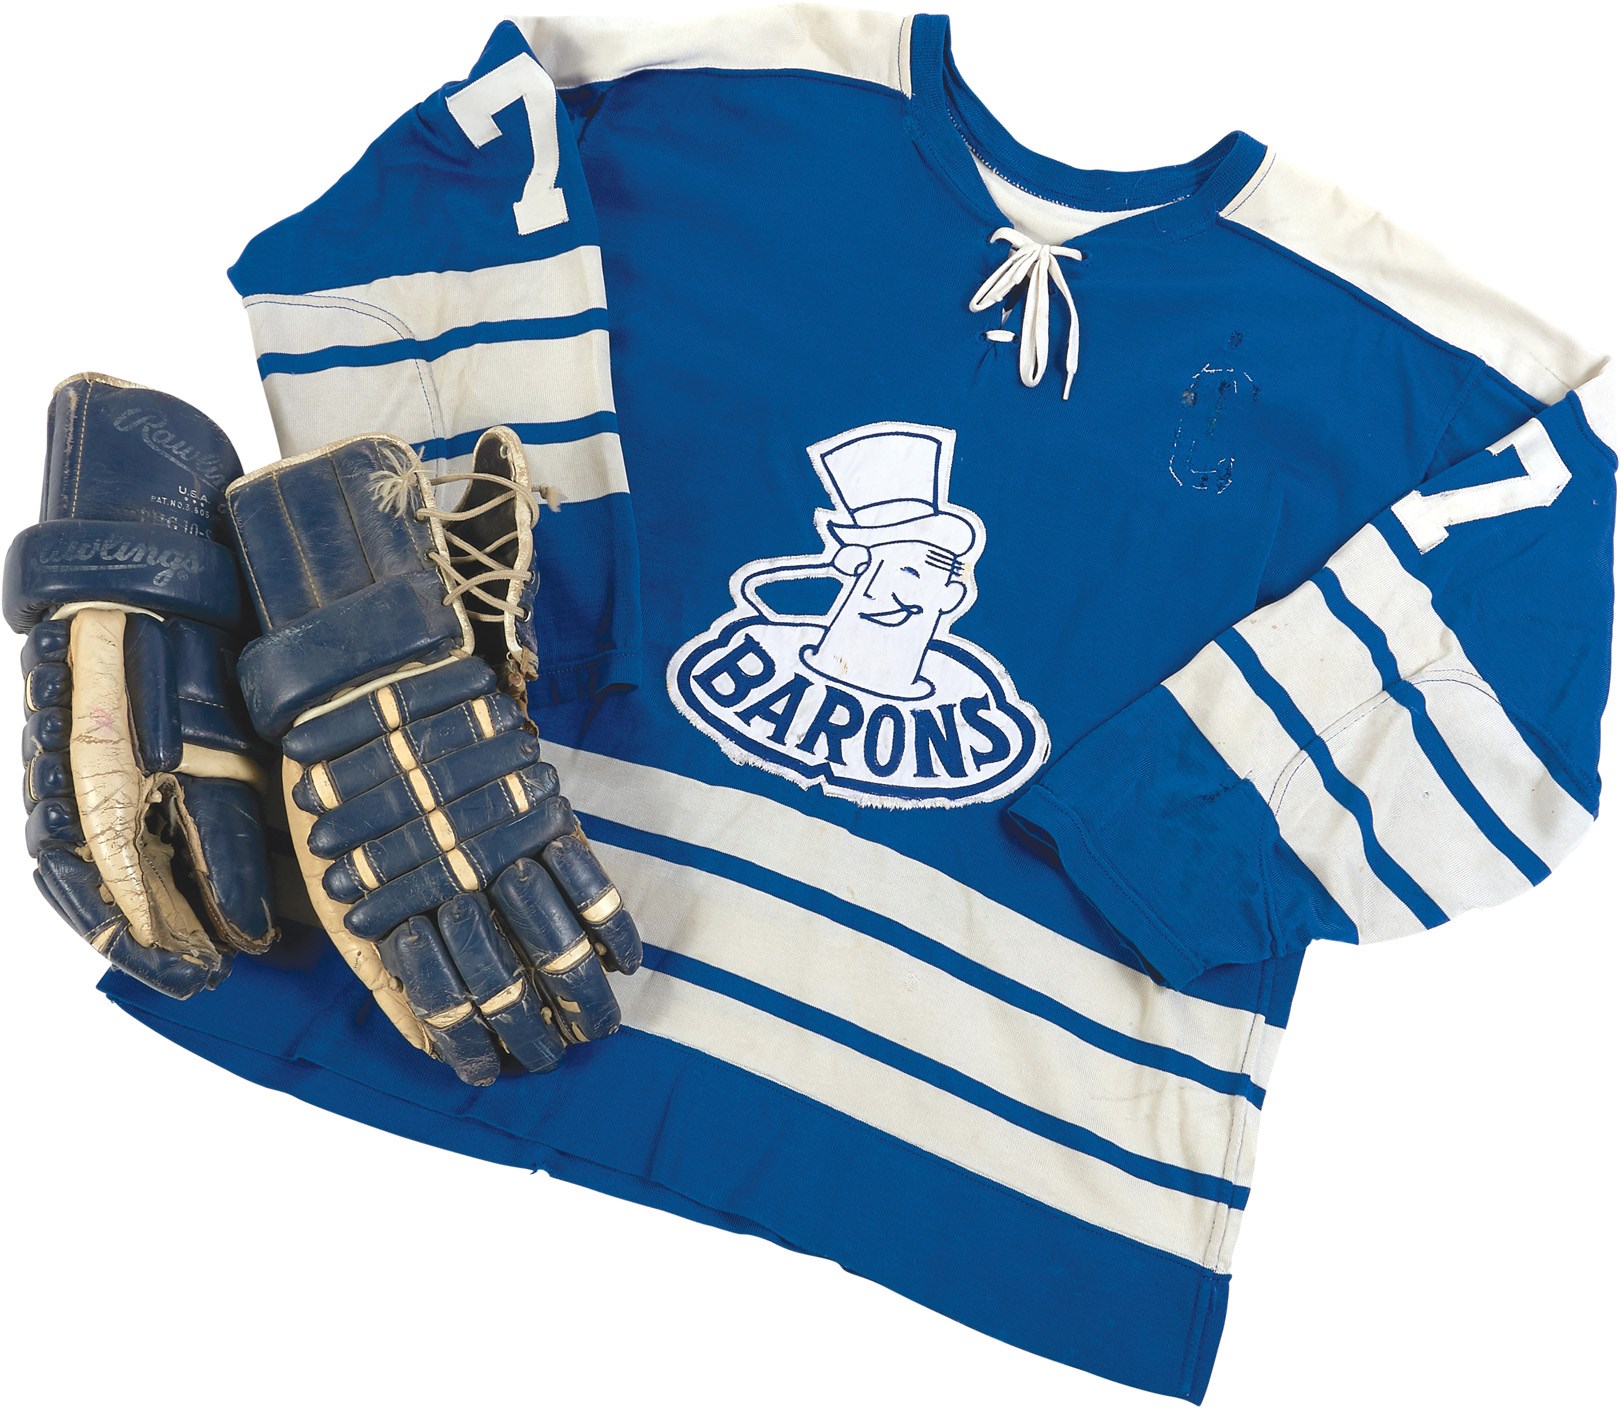 Hockey - 1971-72 Mike Chernoff Cleveland Barons Game Worn "Captain" Jersey & Gloves